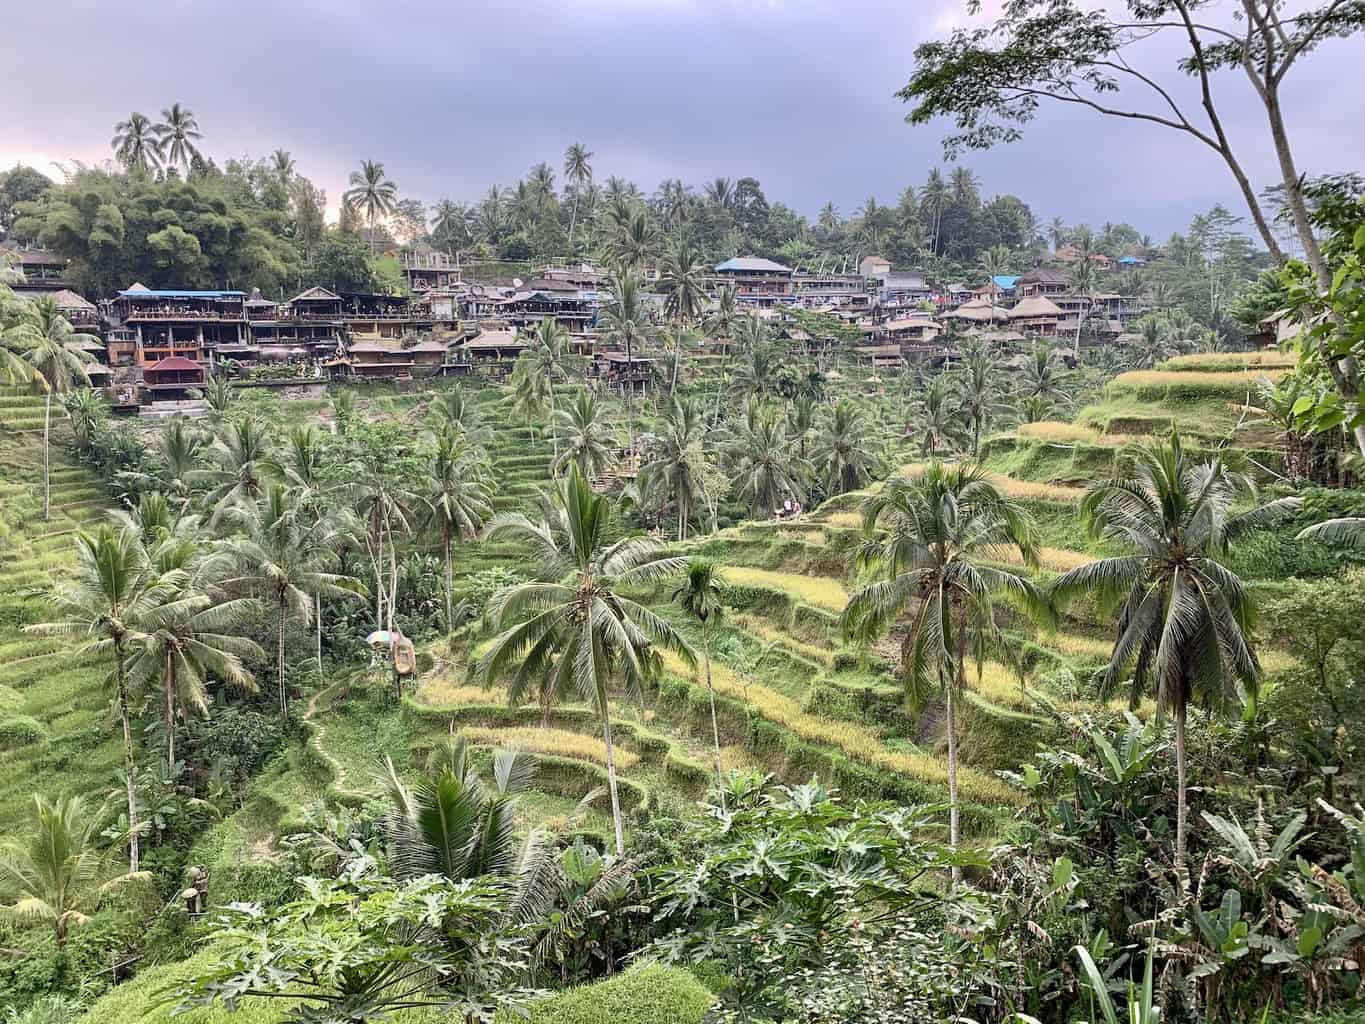 A Complete Ubud Itinerary | 3 Days in Ubud